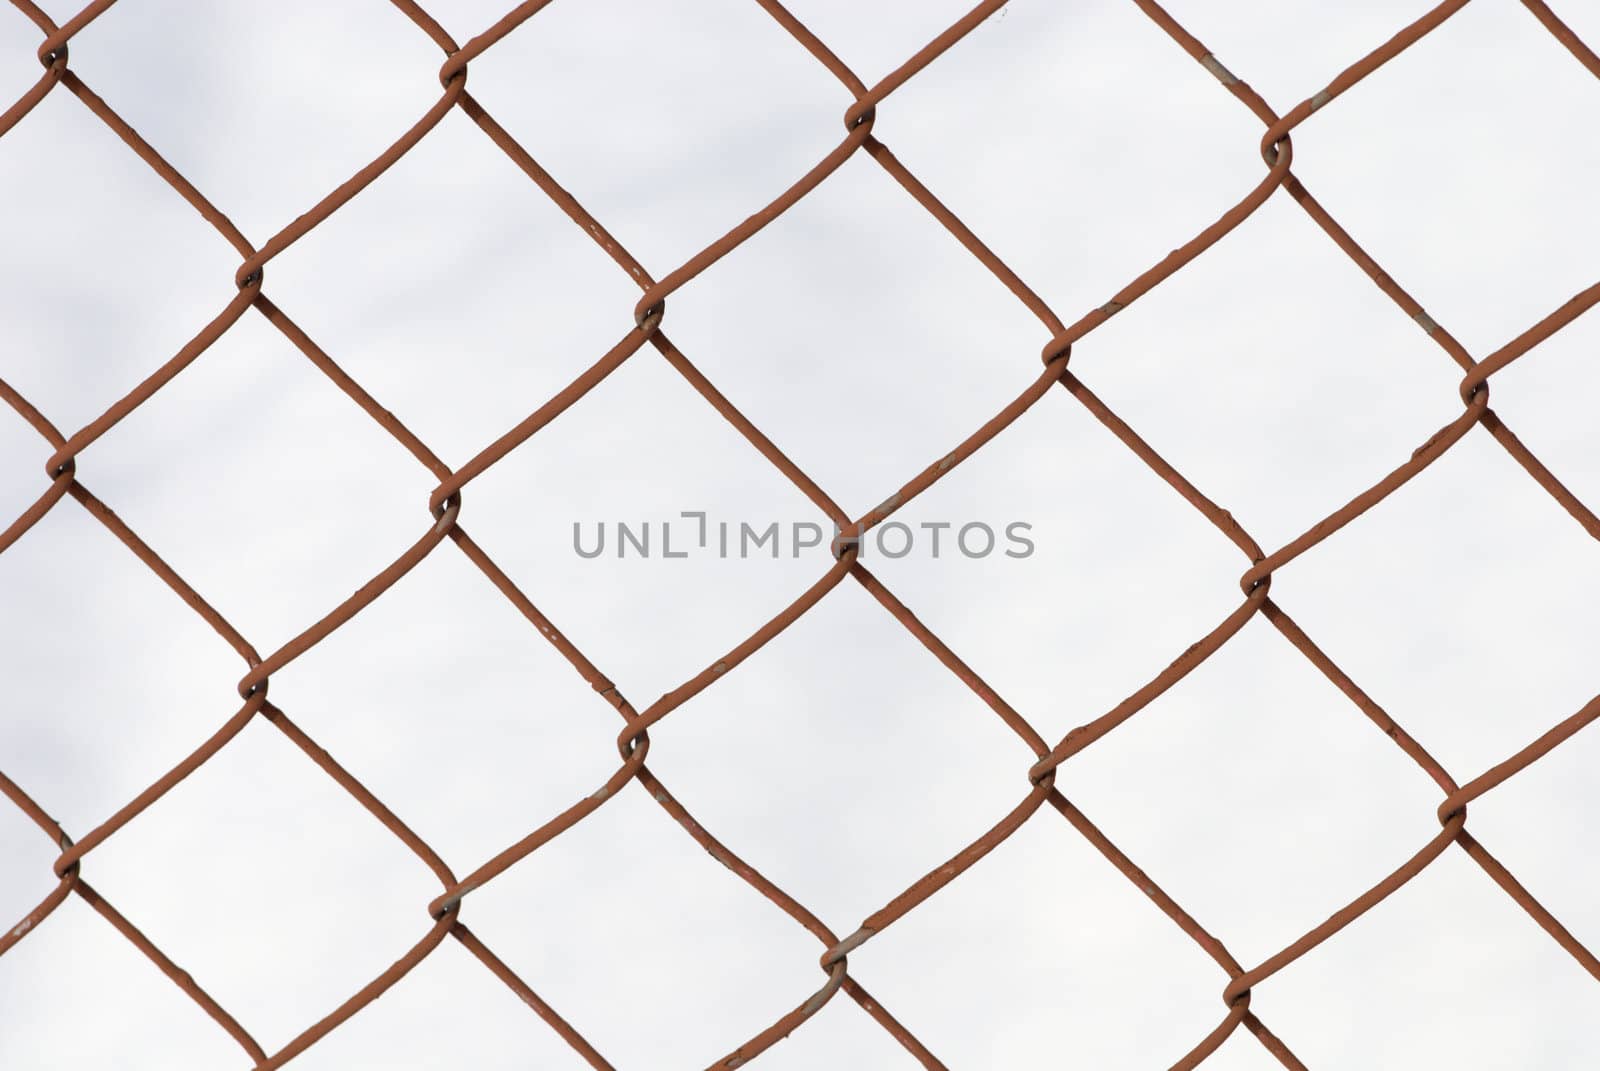 Knotted grid by Olinkau